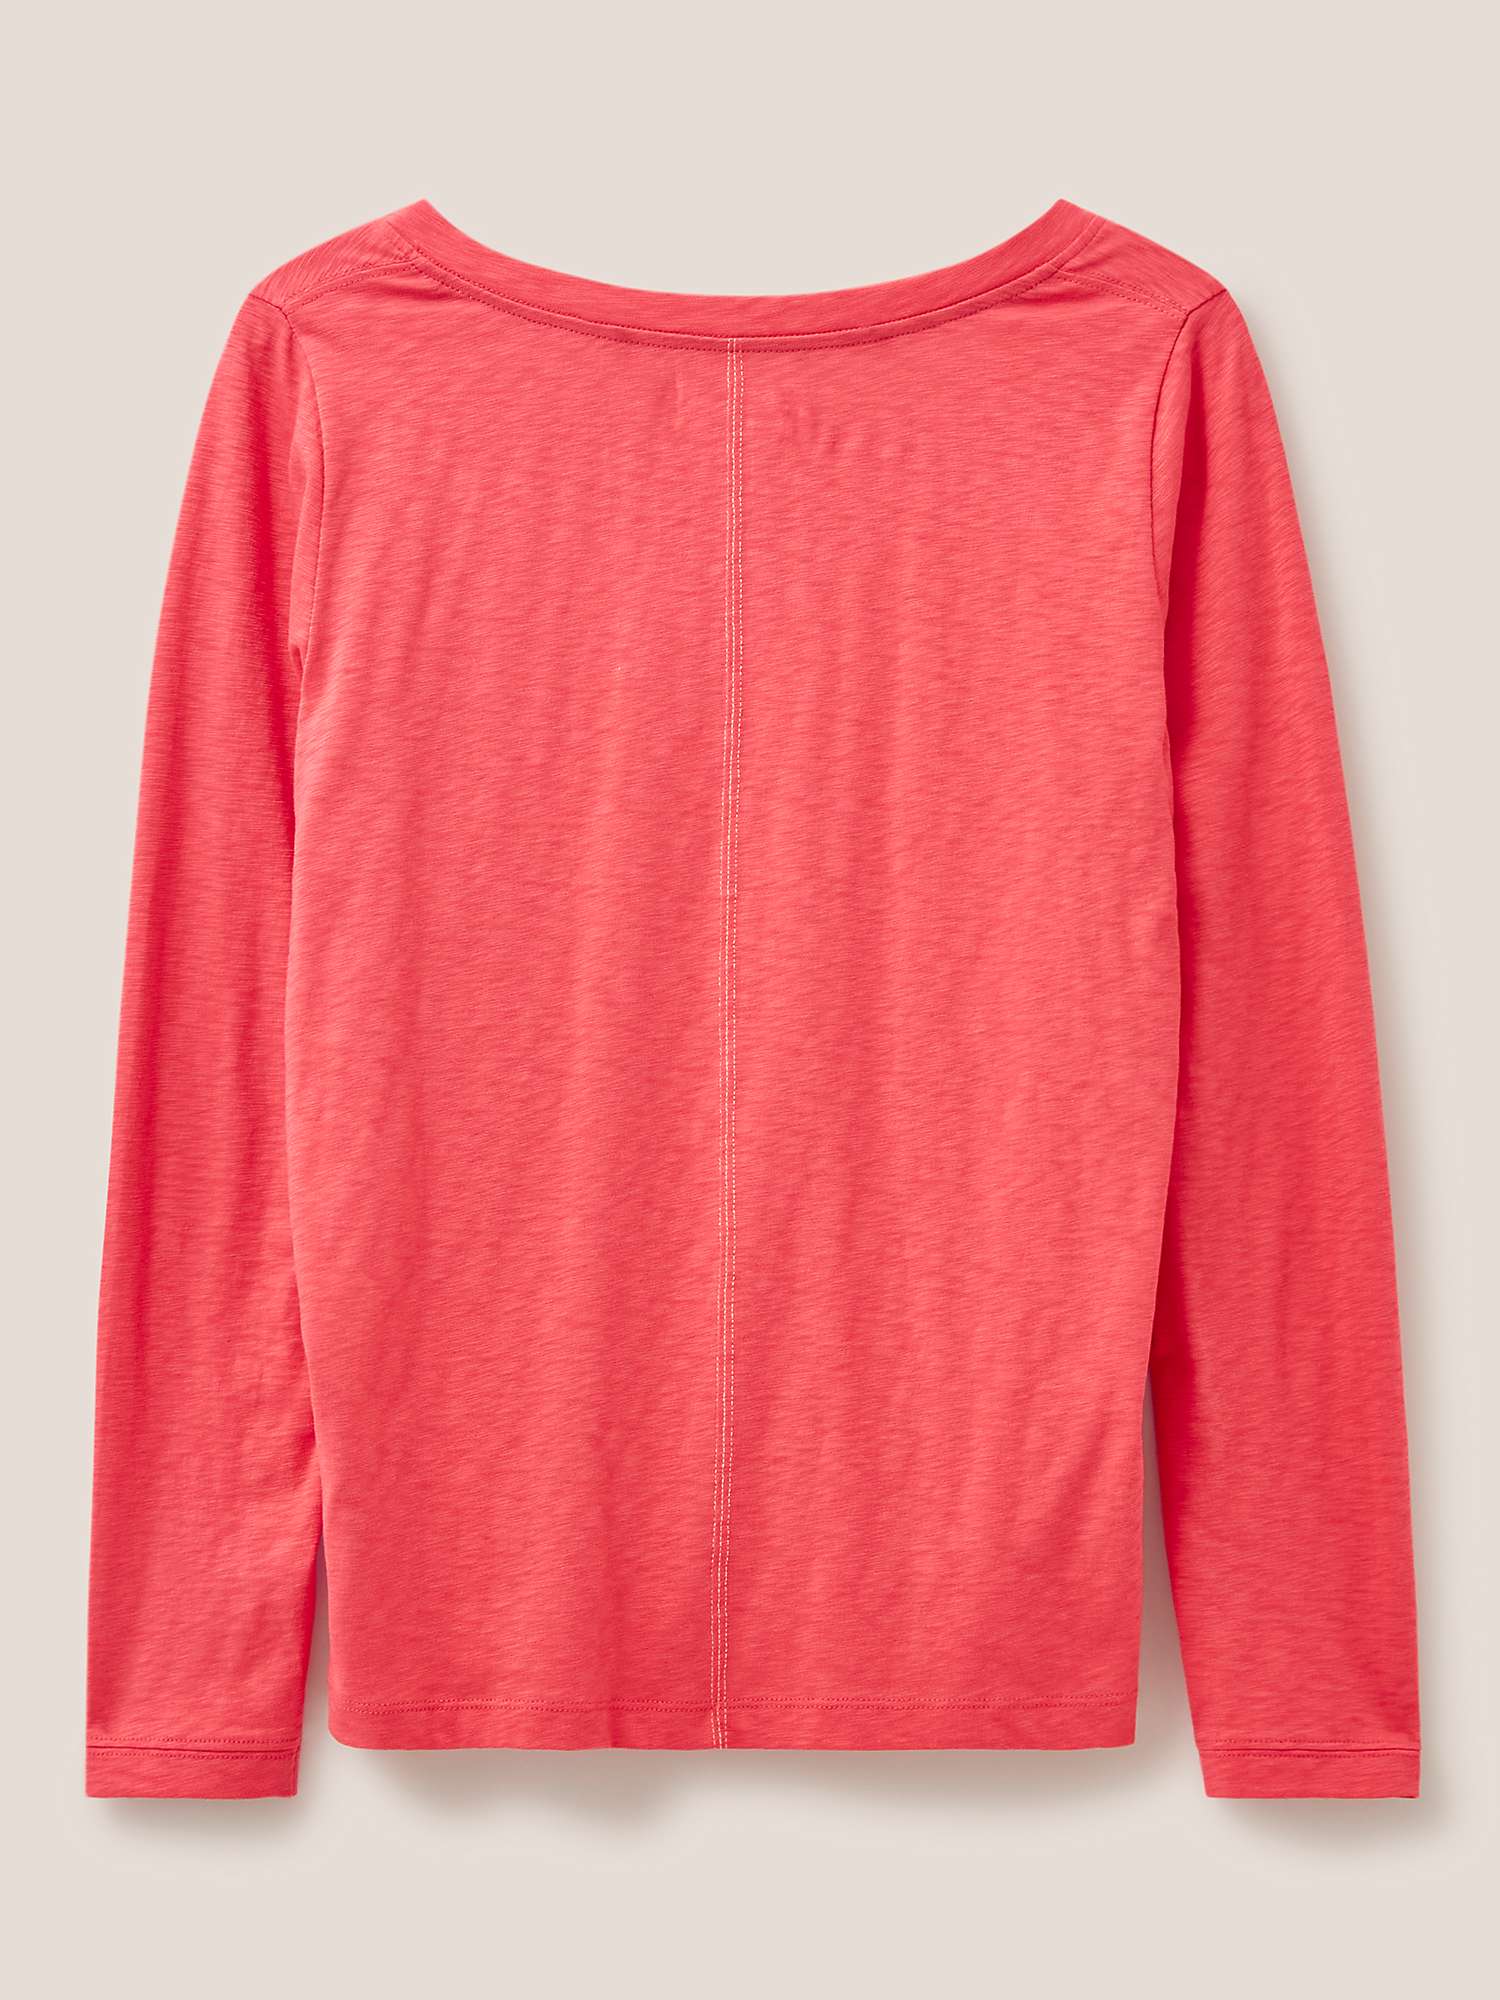 Buy White Stuff Nelly Long Sleeve Printed Cotton Top Online at johnlewis.com